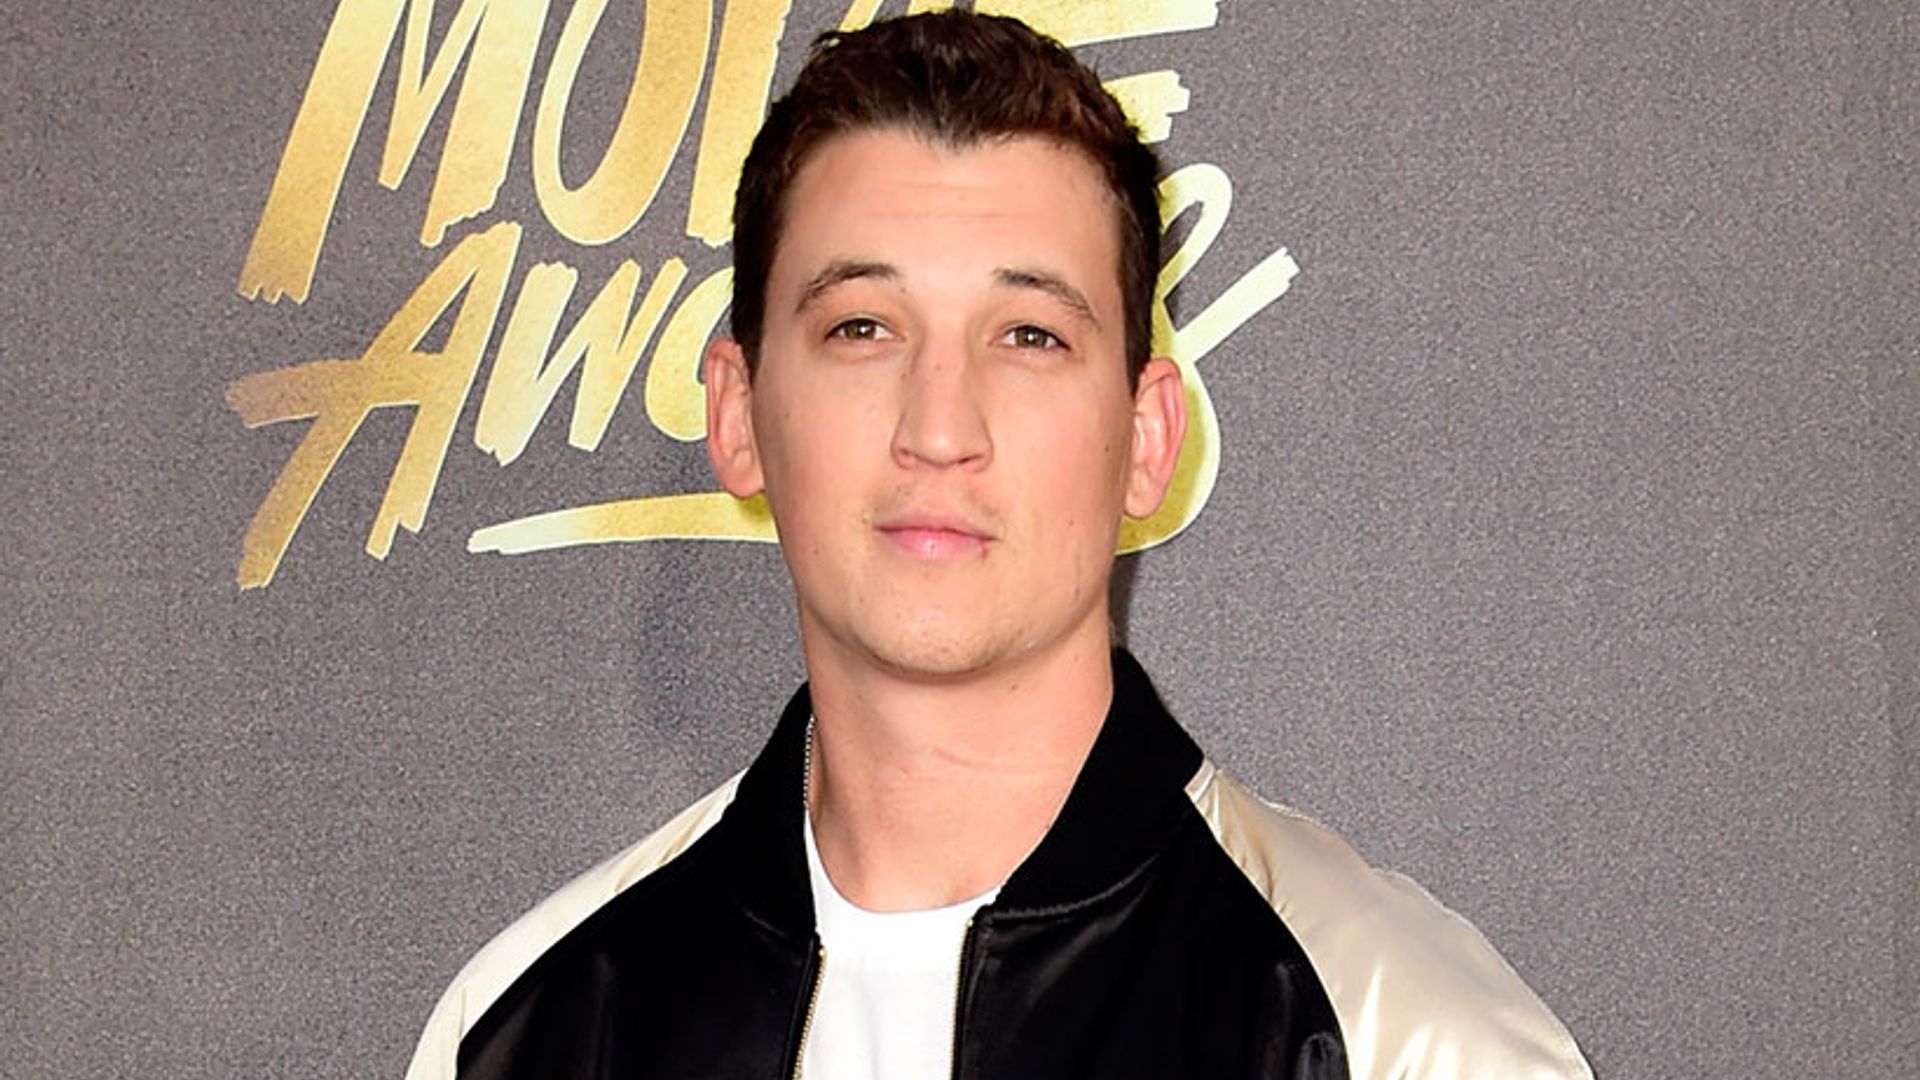 Miles Teller sparked a social media frenzy with his MAJOR makeover